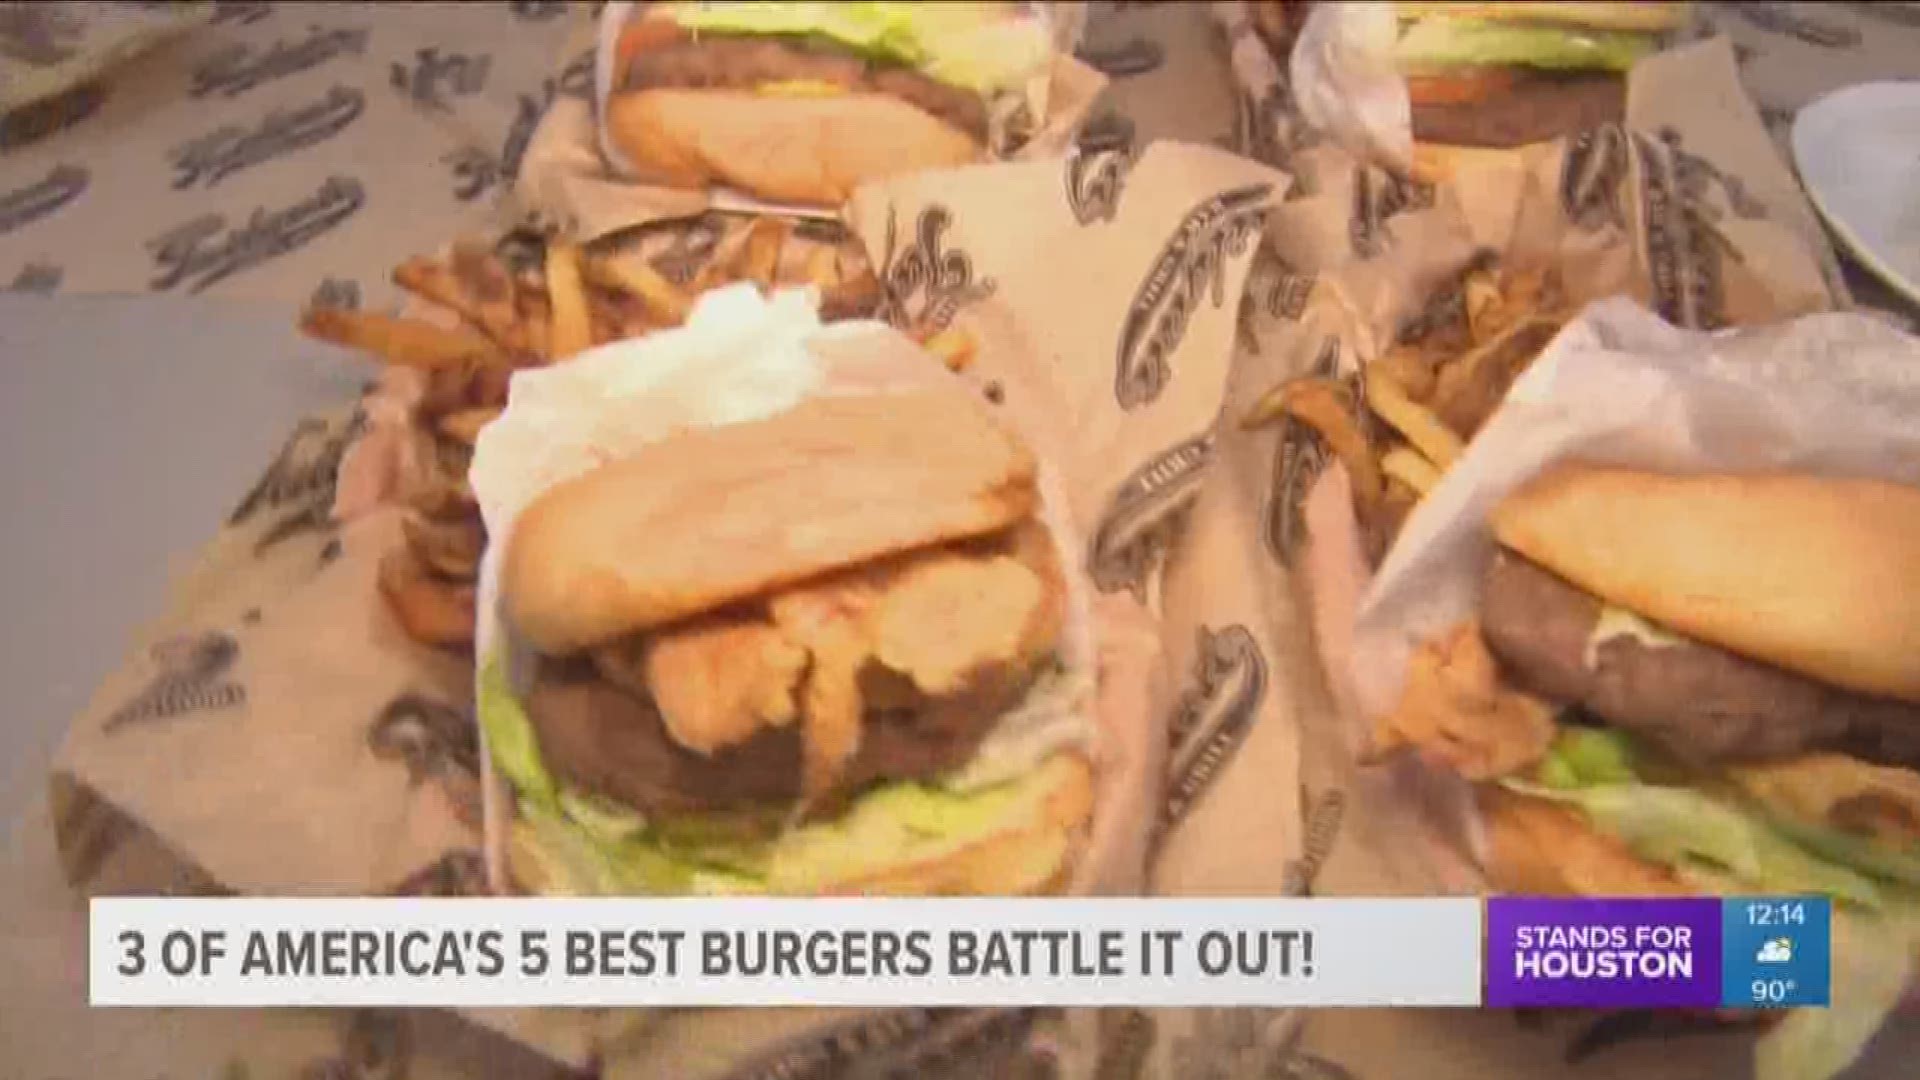 Four local burger joints made The Daily Meal's list for the 101 Best Burgers in America.